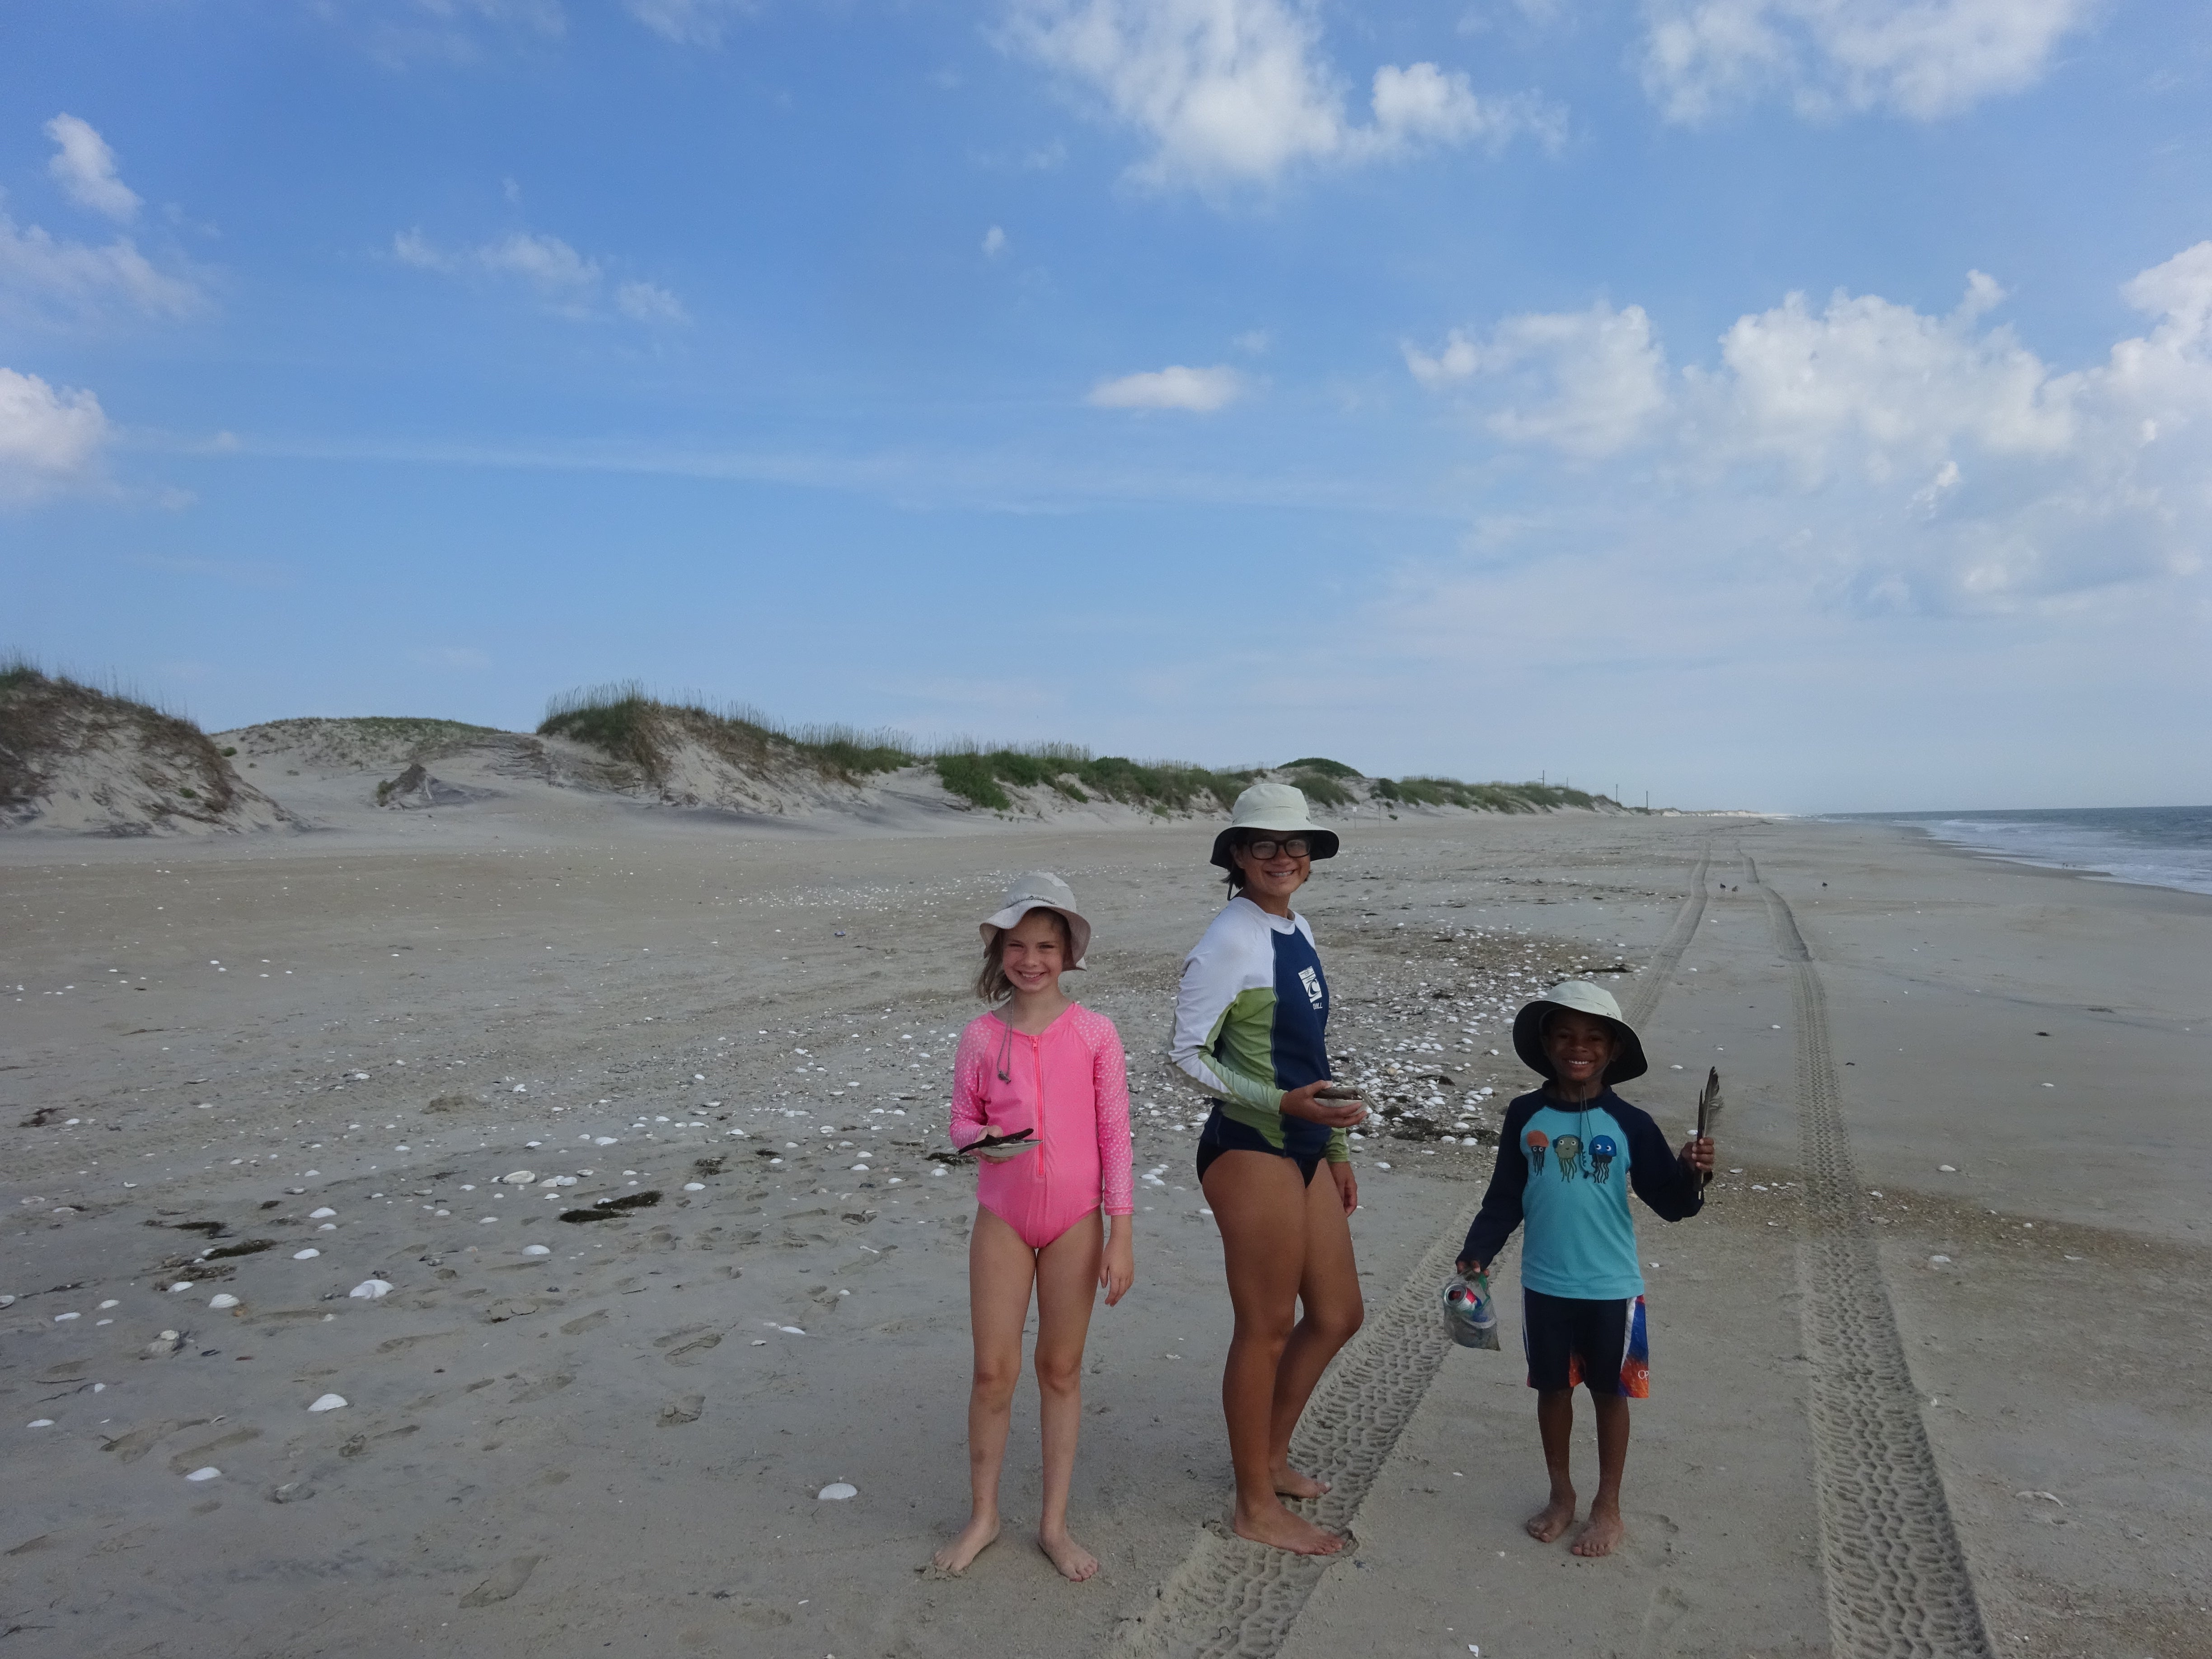 Kiddos finding shells on the beach - yes you can drive on the beach in certain areas here!